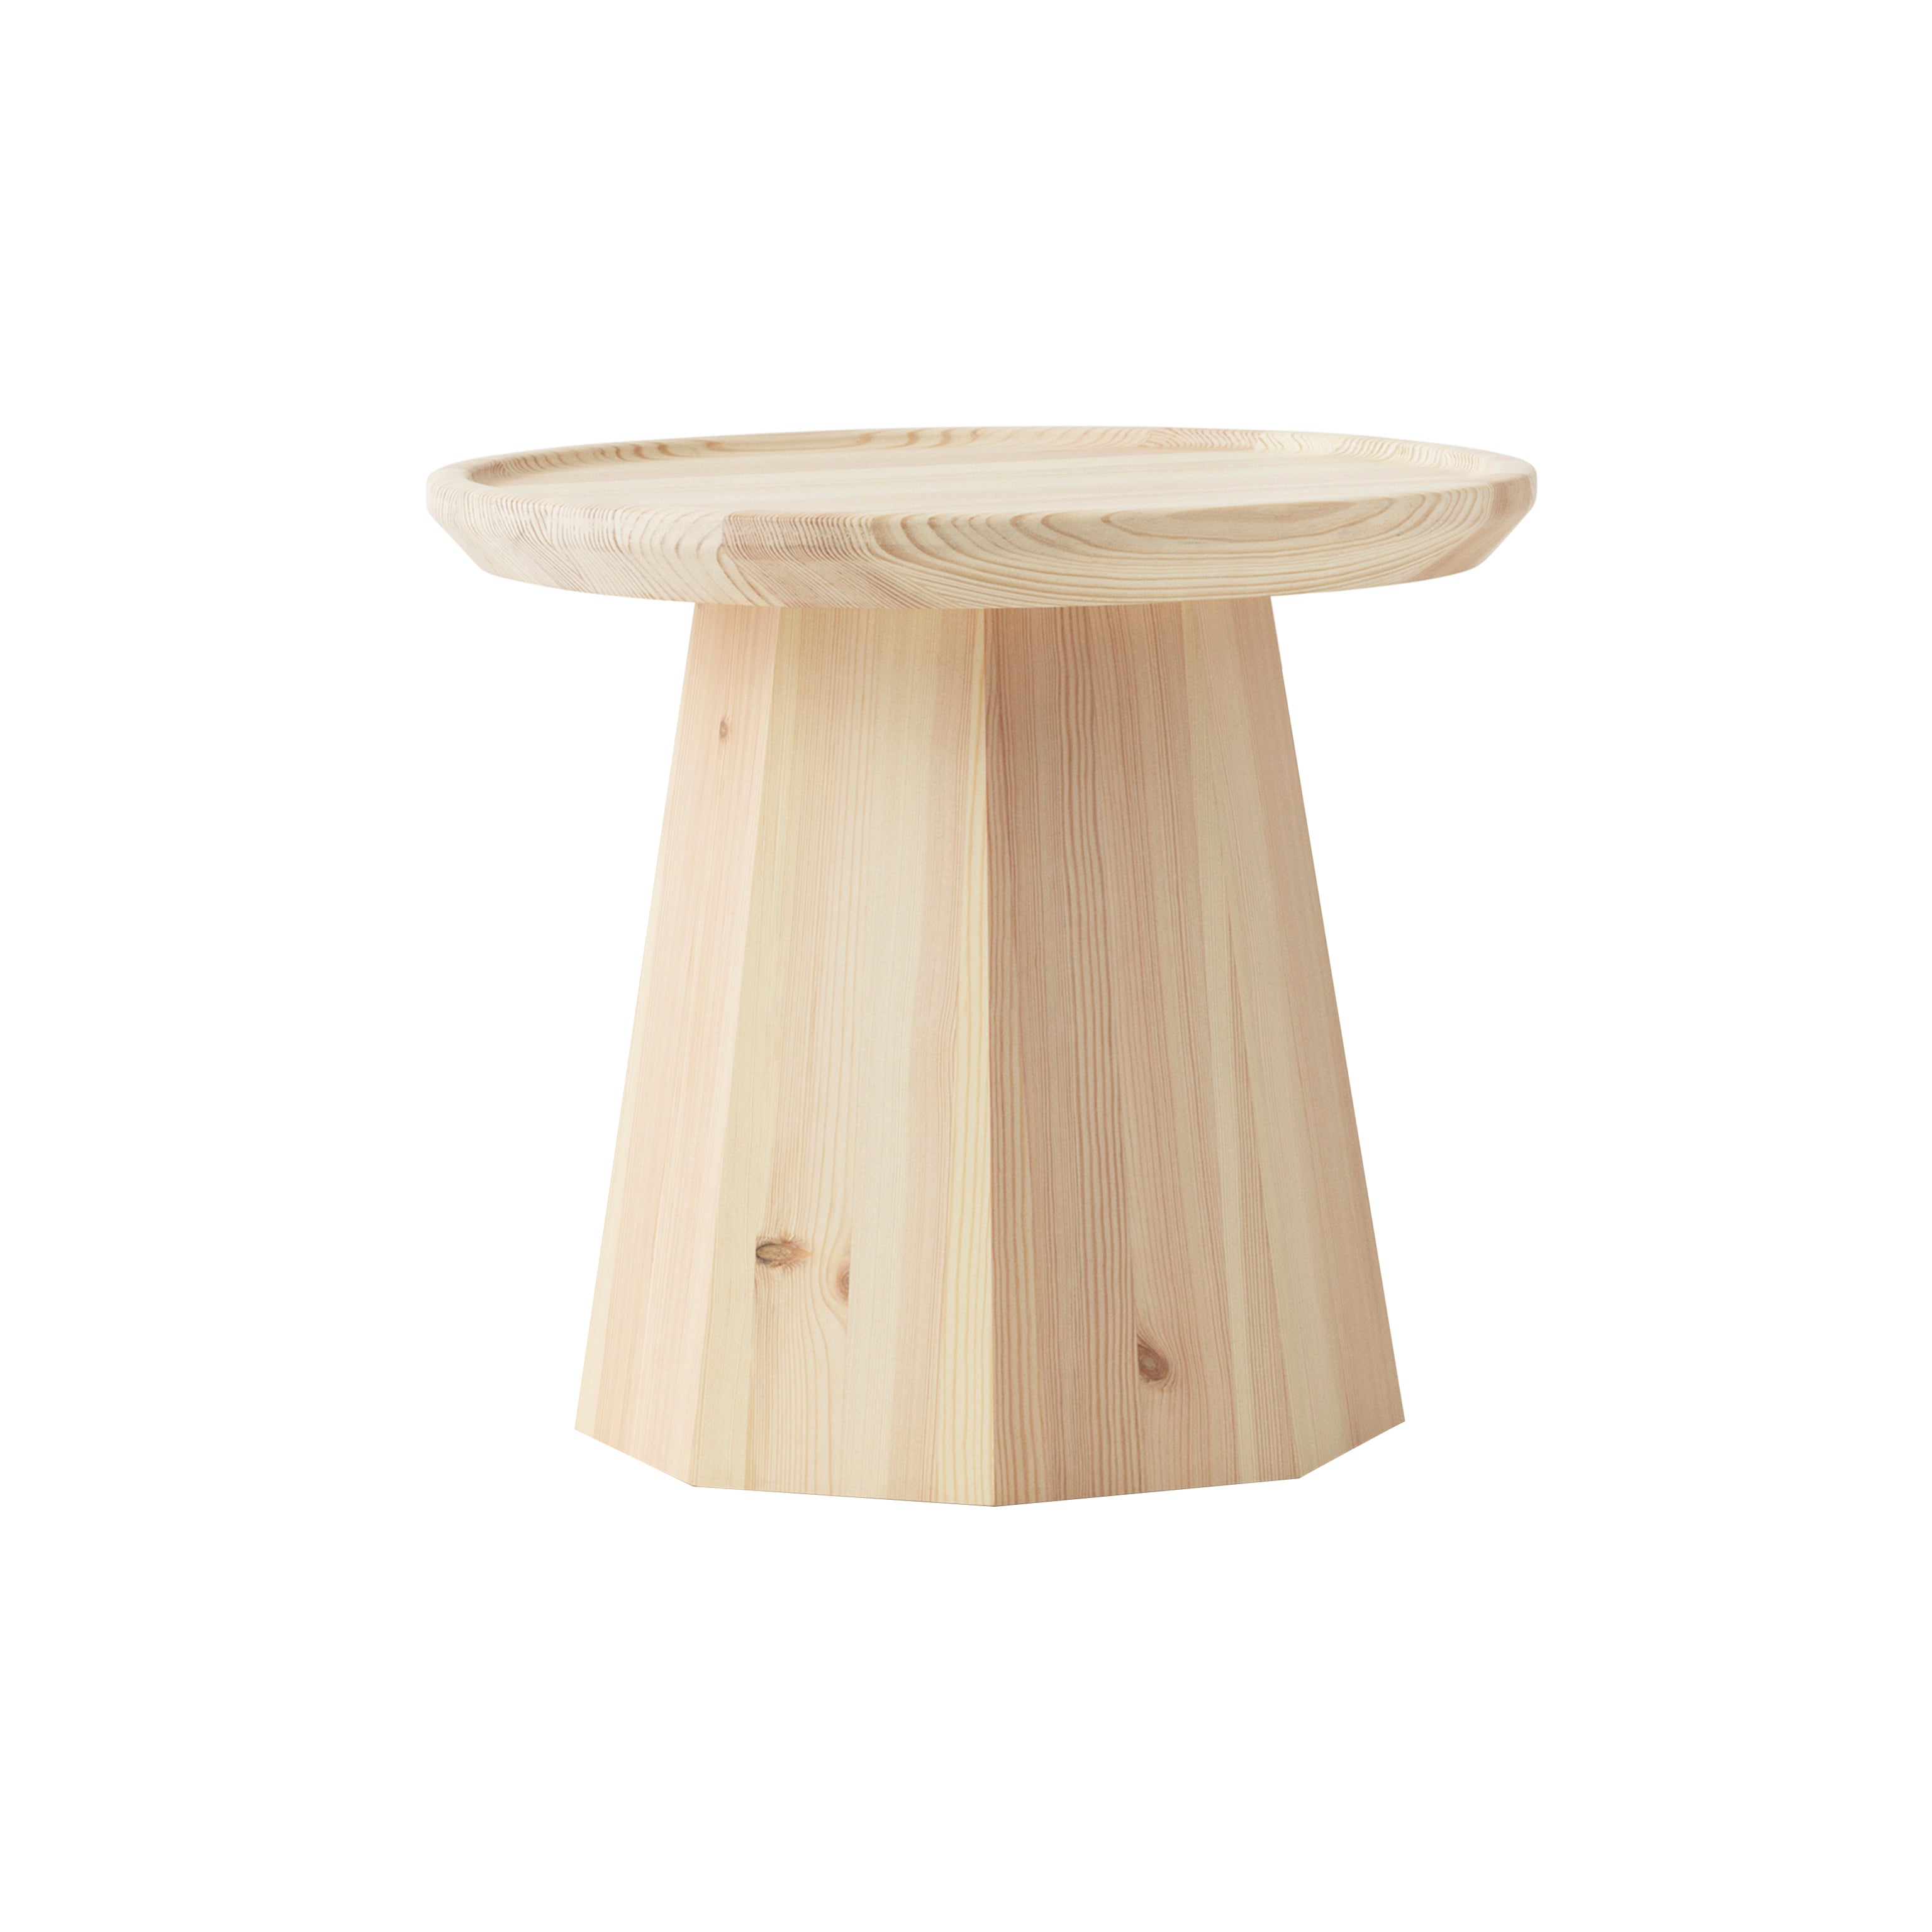 Pine Table: Small - 17.7